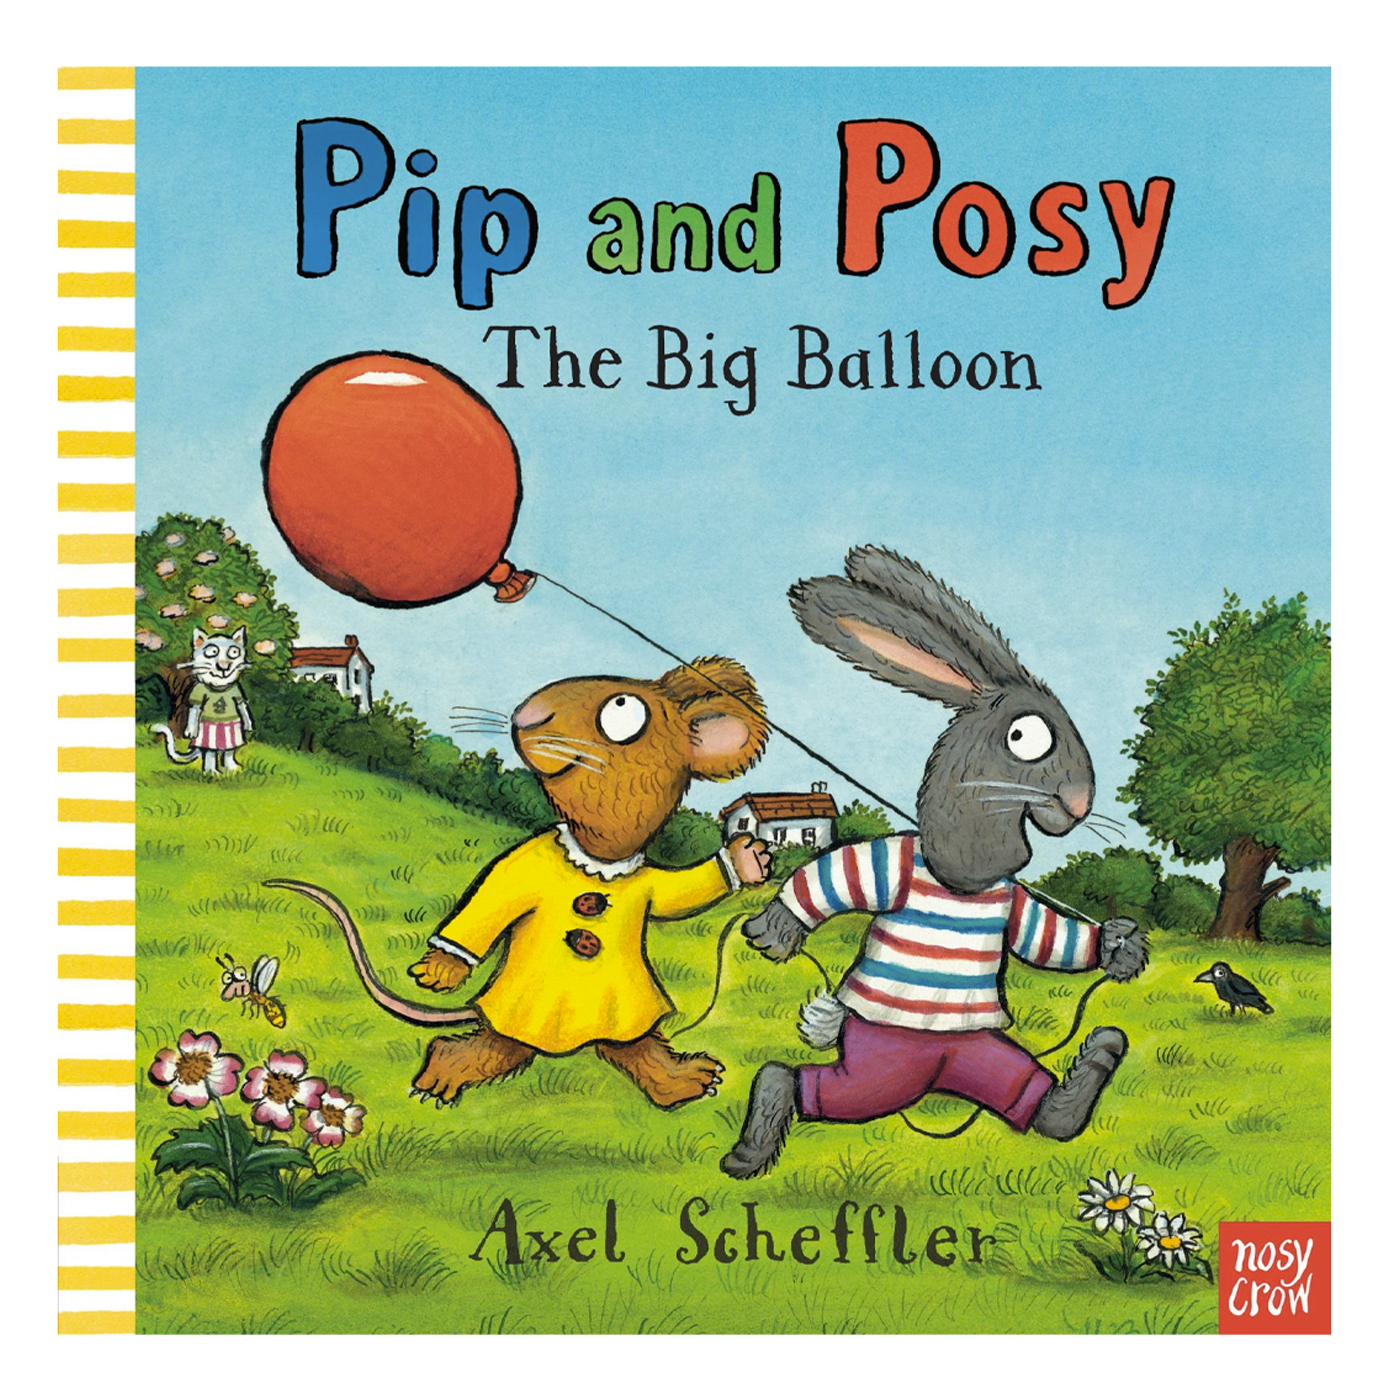  Pip and Posy: The Big Balloon